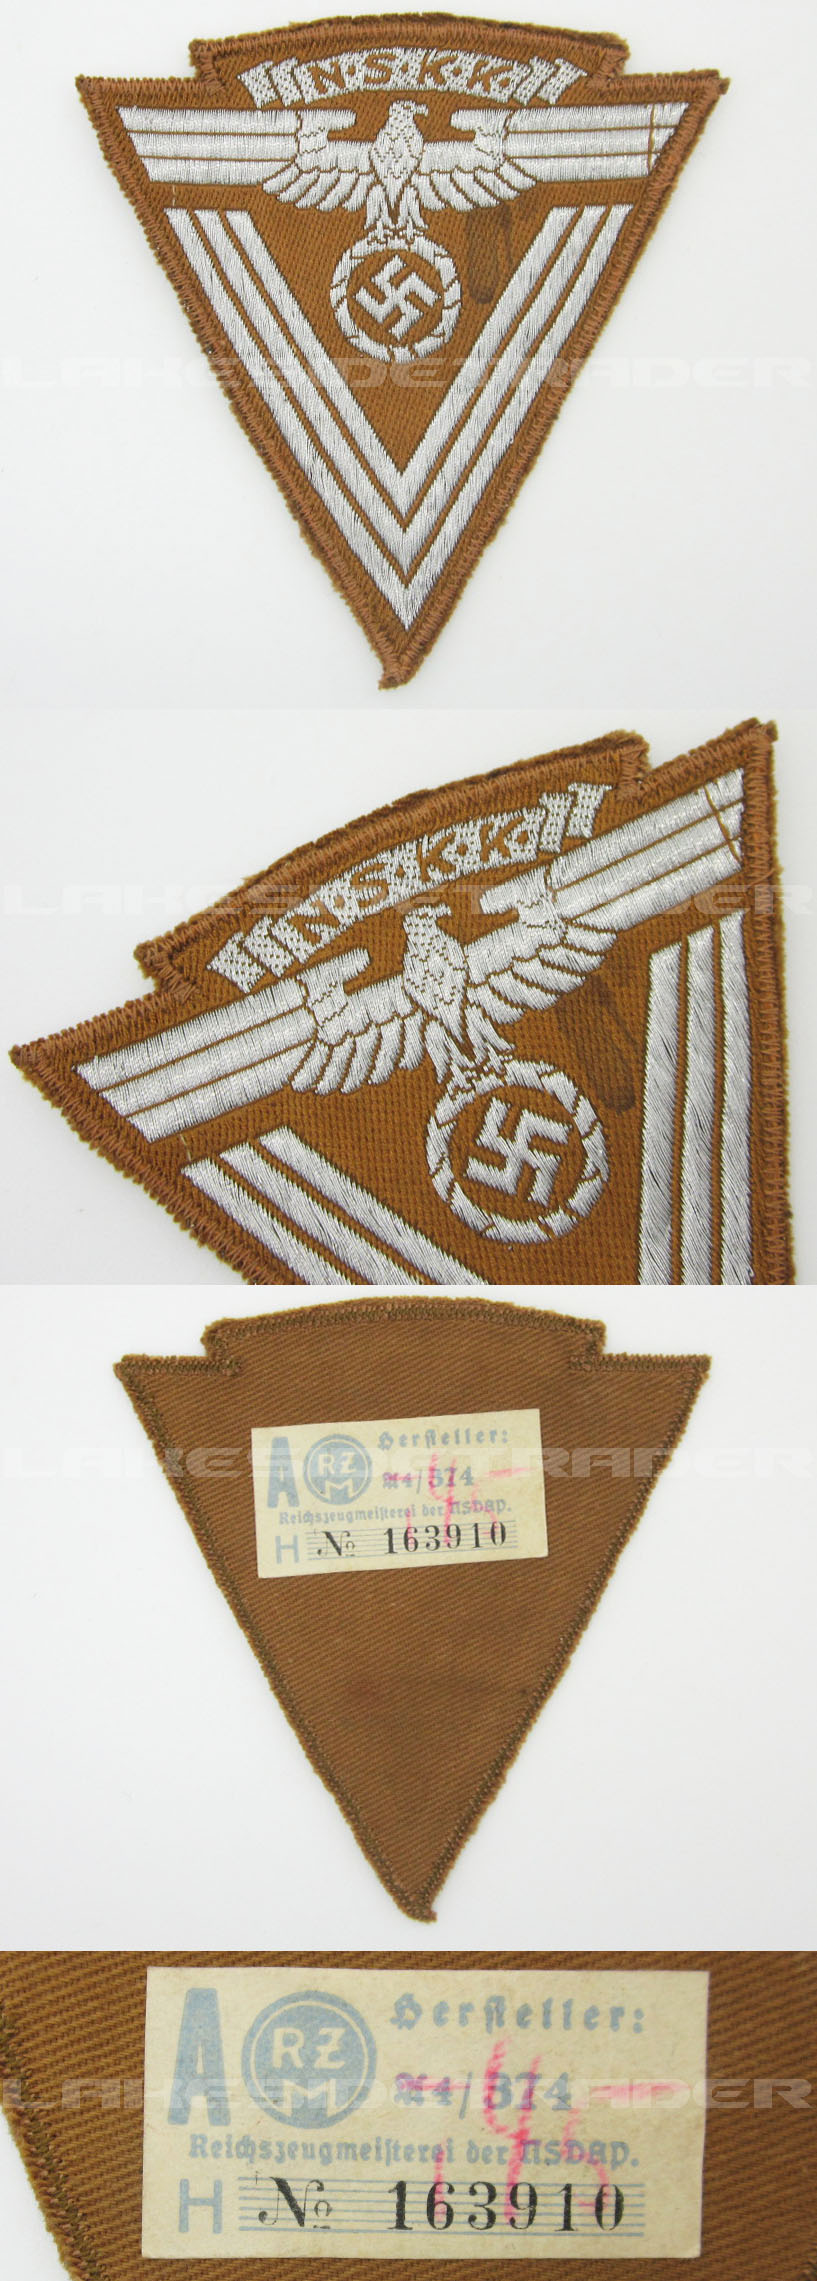 NSKK “Old Fighters”? Sleeve Eagle with Chevrons